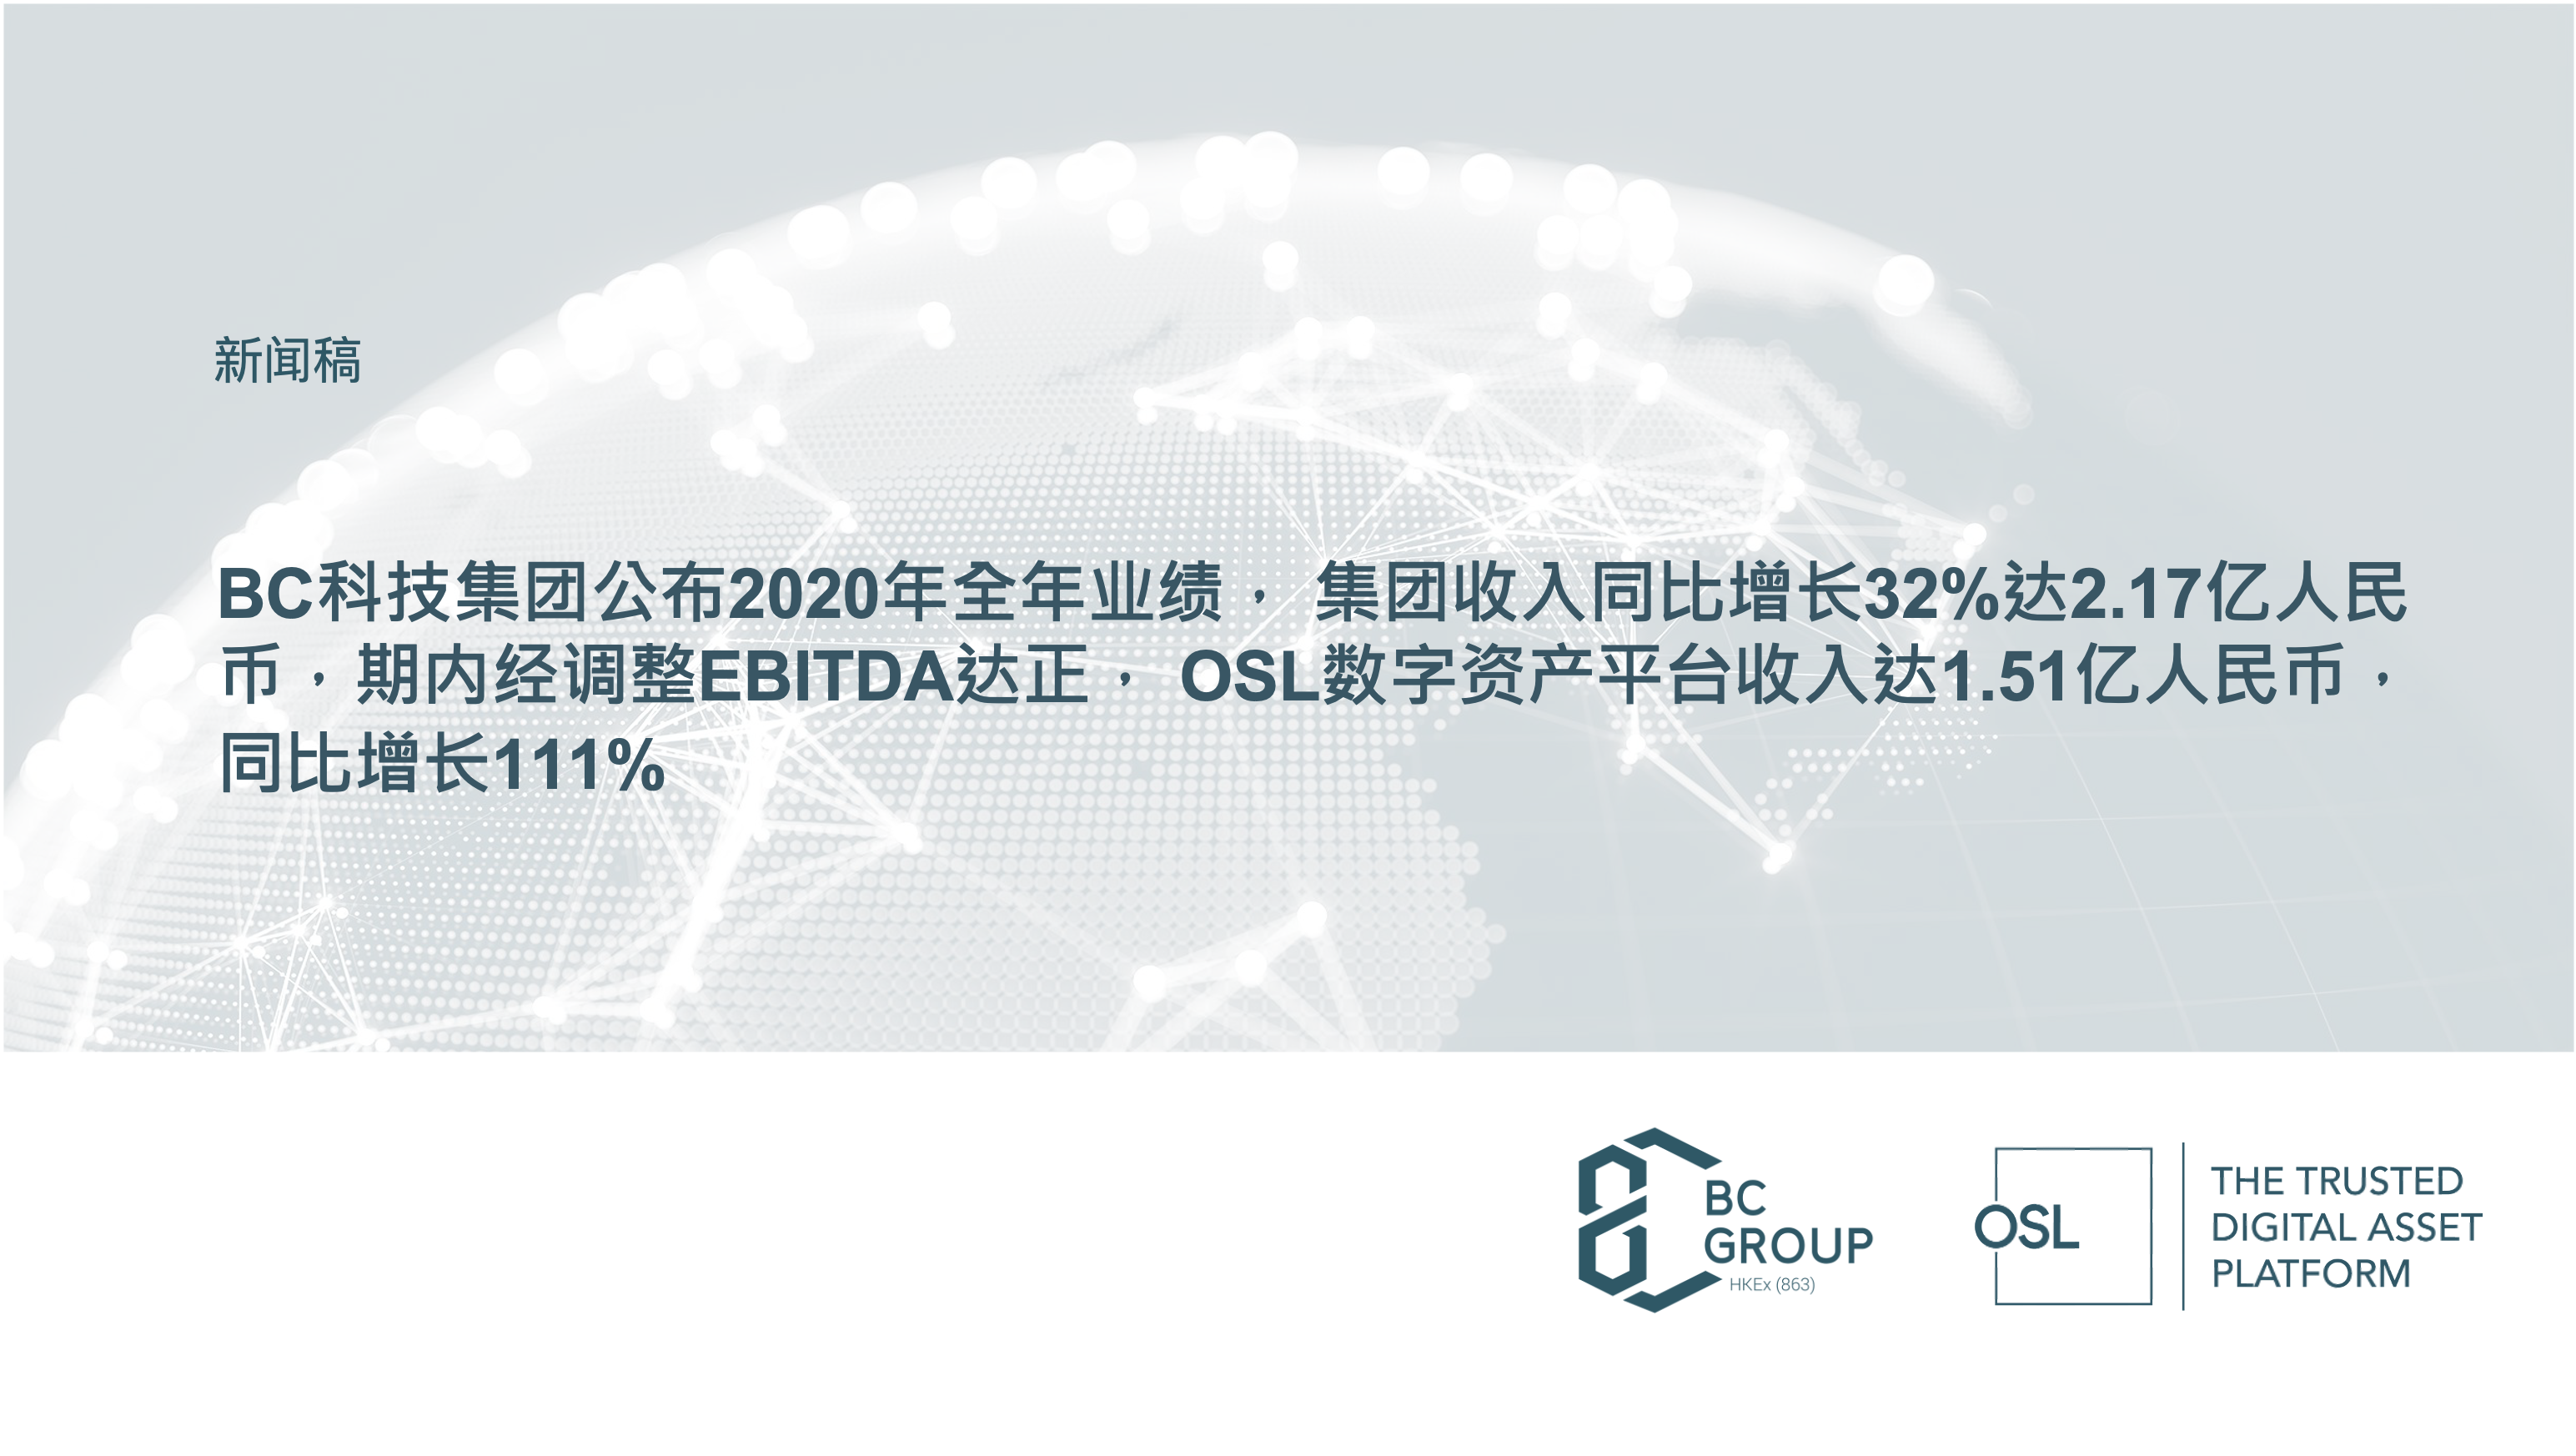 BC Technology Group 2020 Annual Results:  Group Revenues up 32% YoY to RMB217 mln, Posts Positive Adjusted EBITDA for Year  OSL Digital Asset Platform Revenues Increase 111% YoY to RMB151 mln